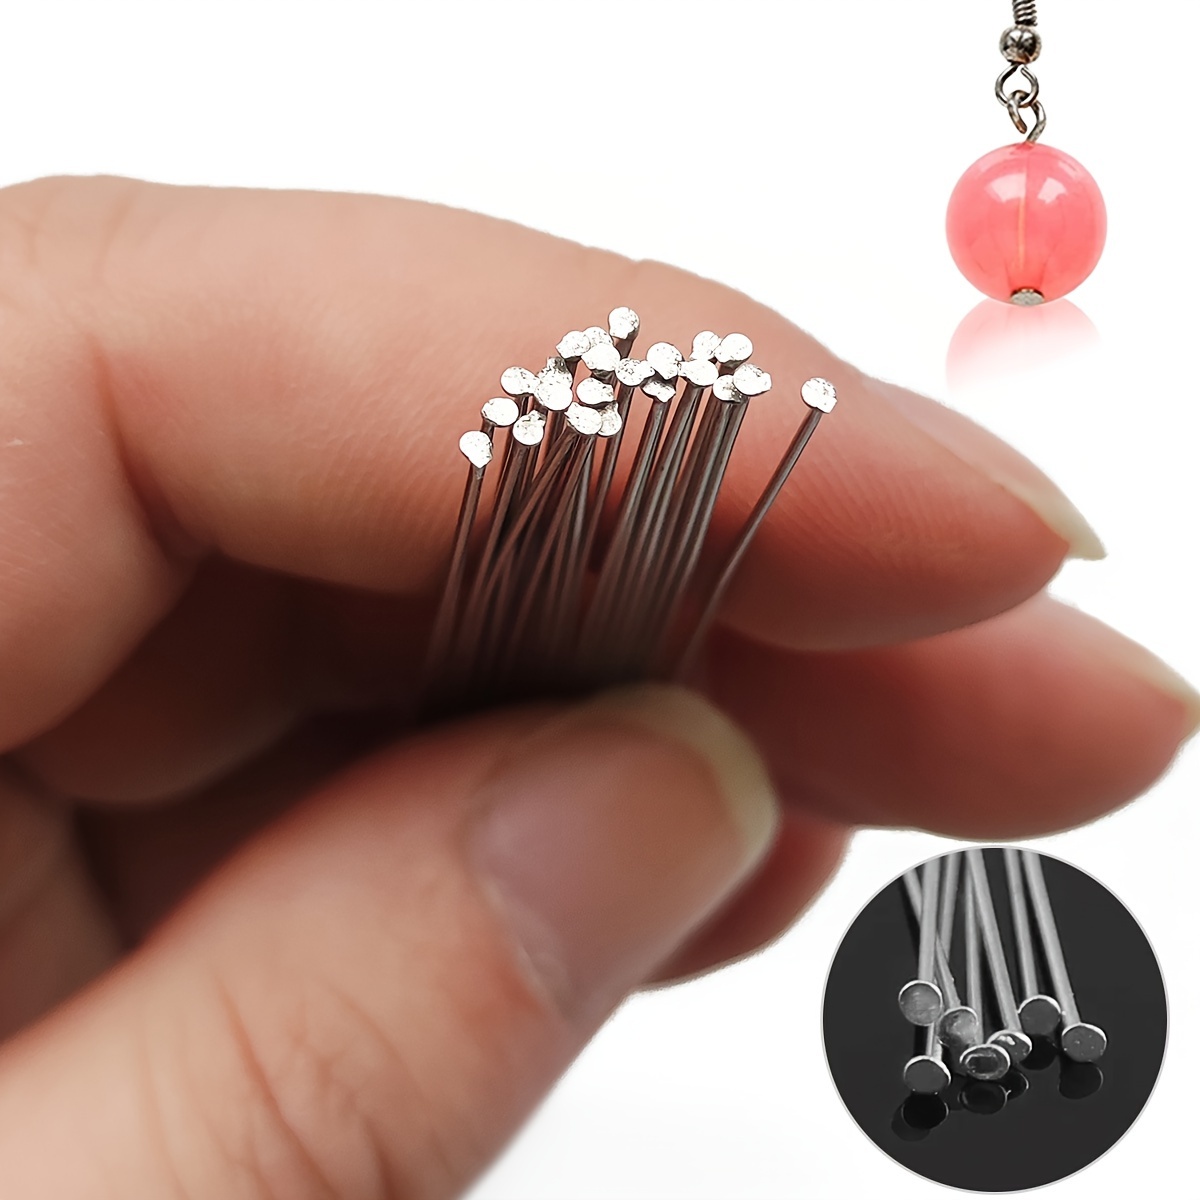 

200pcs Length 20-70mm T-shaped Needle Flat Head Pin Stainless Steel Head Pins For Diy Bracelet Necklace Earrings Hairpin Accessories Handmade Jewelry Material